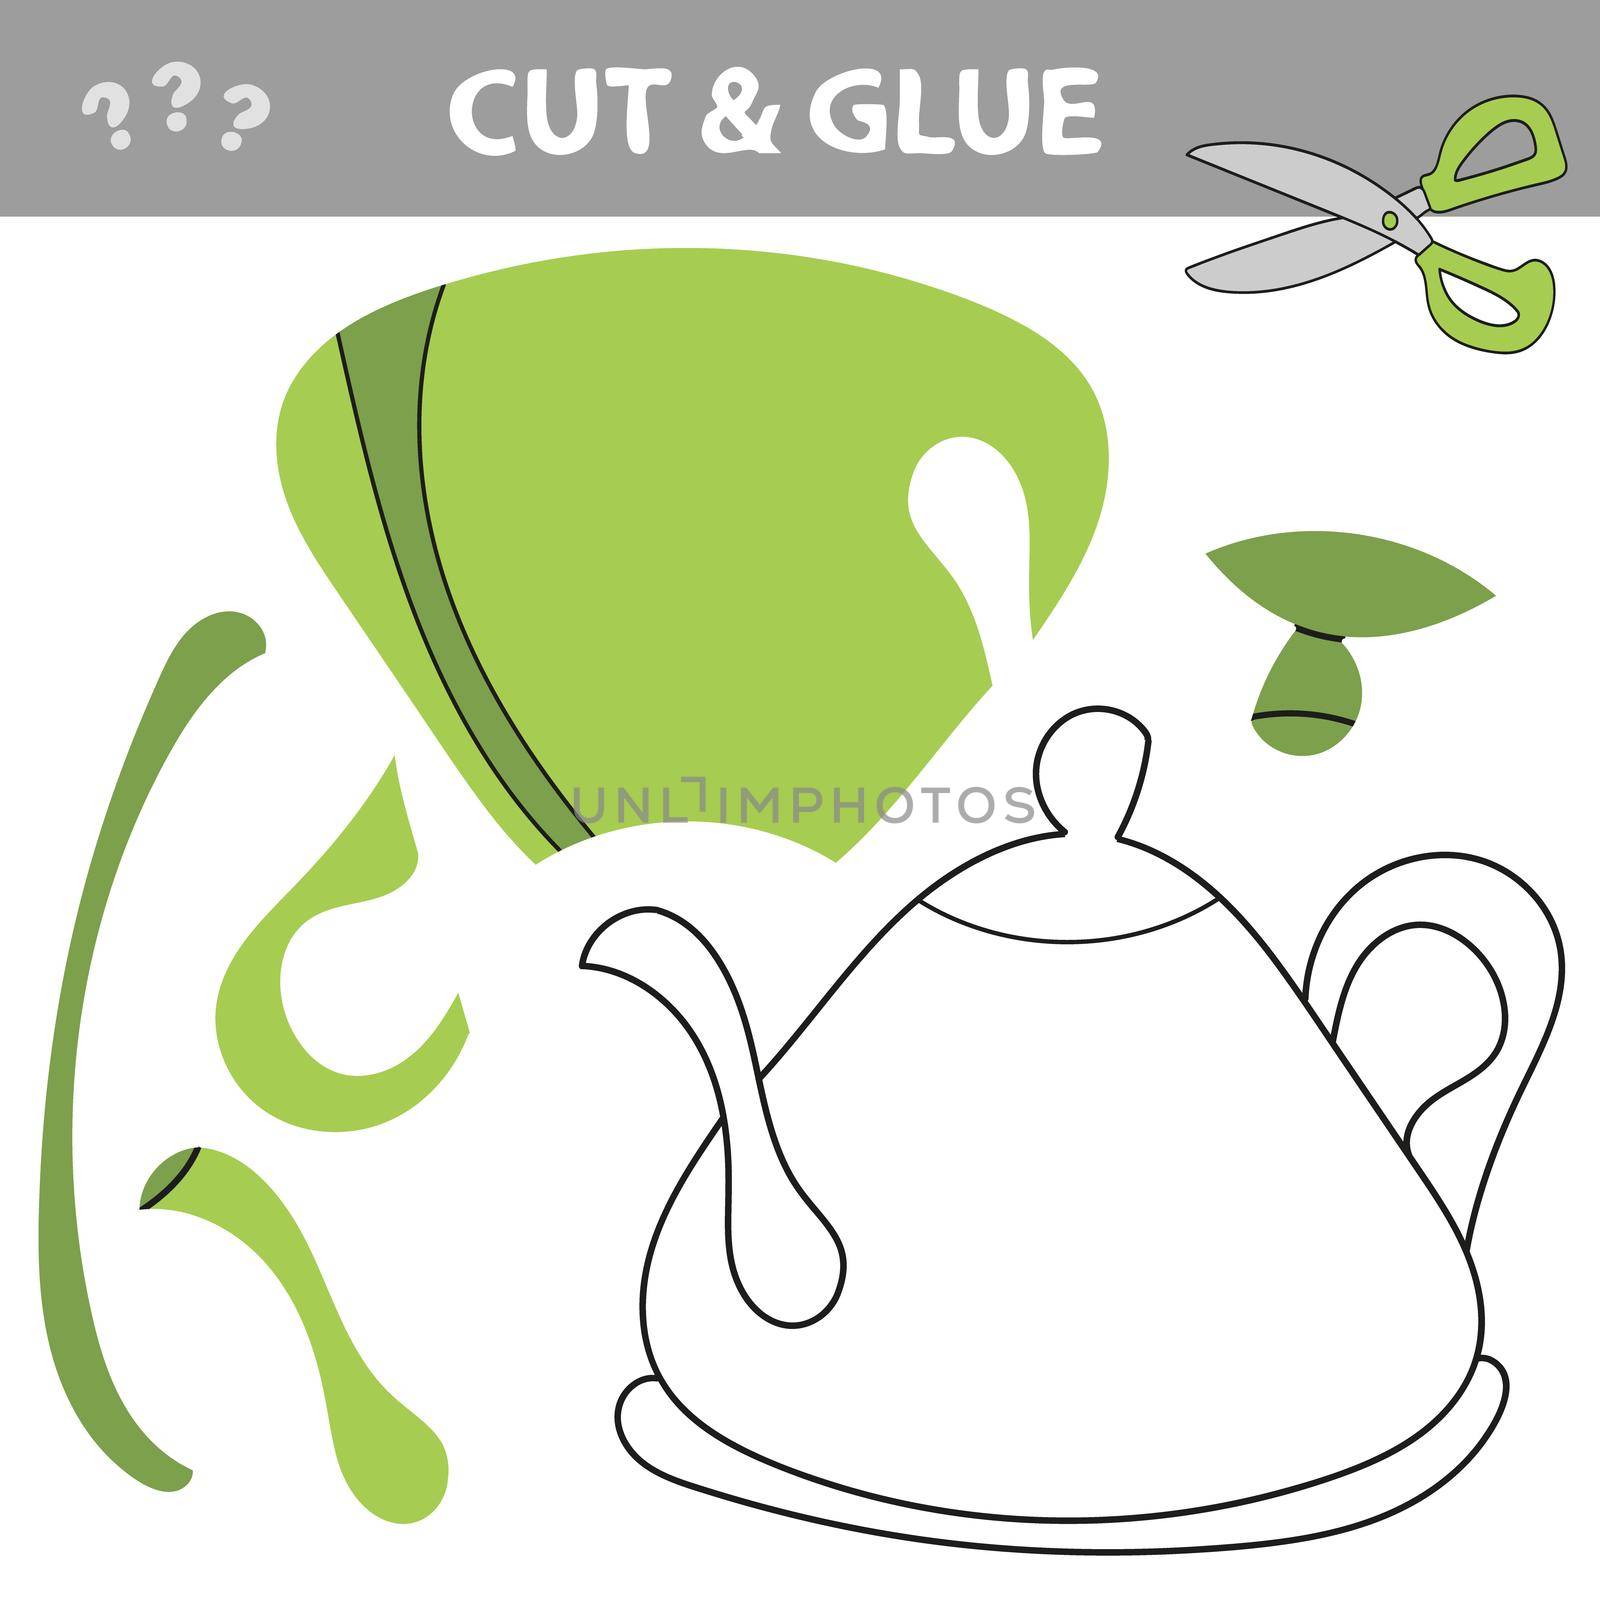 Cut and glue - Simple game for kids. Cut parts of Teapot and glue them by natali_brill